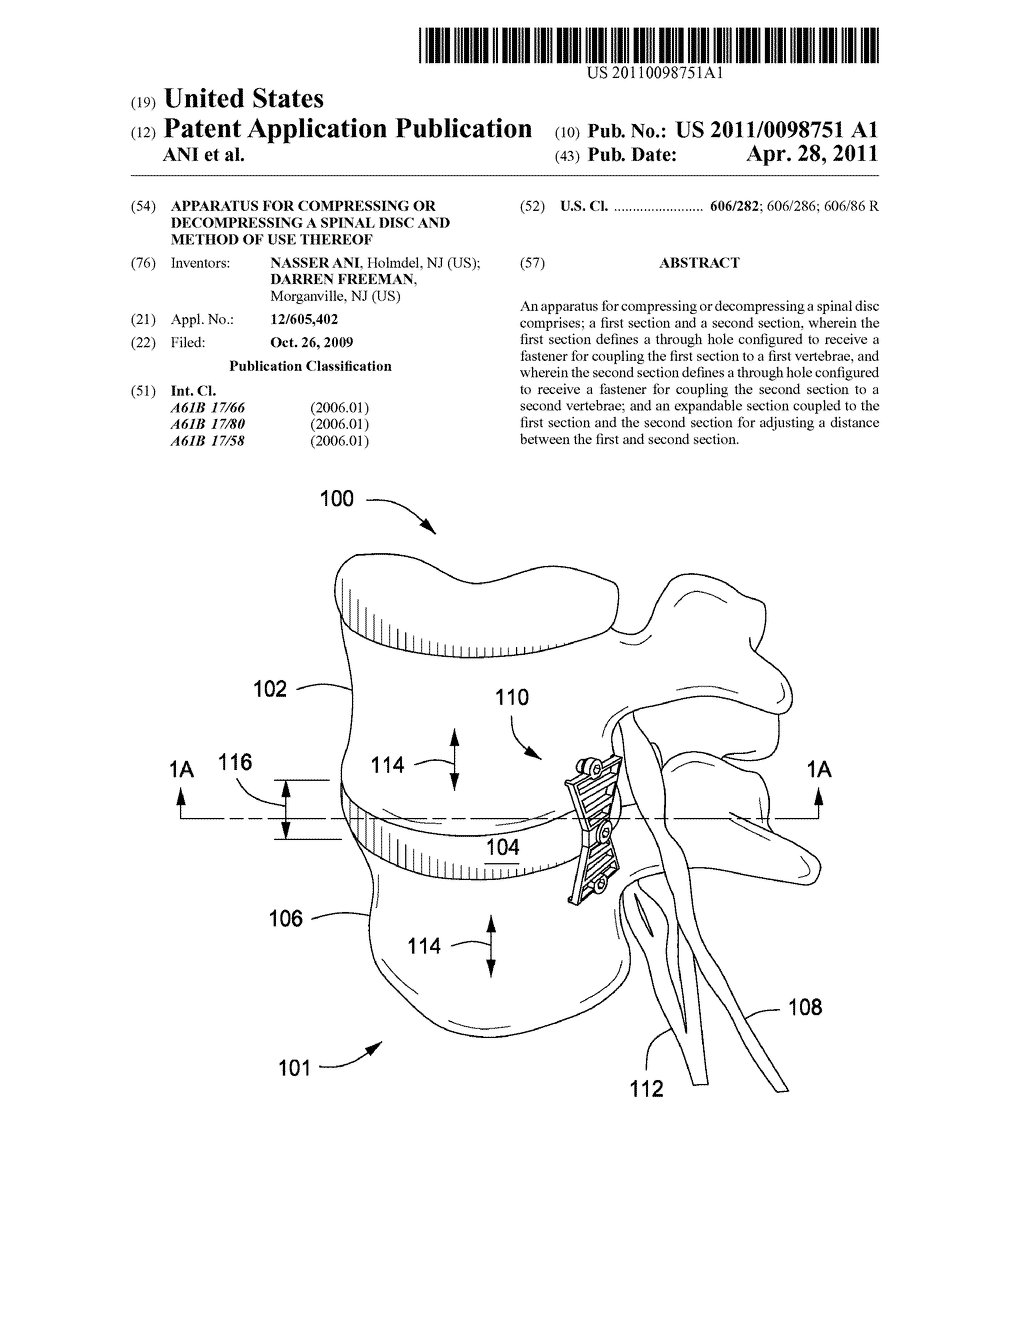 APPARATUS FOR COMPRESSING OR DECOMPRESSING A SPINAL DISC AND METHOD OF USE THEREOF - diagram, schematic, and image 01